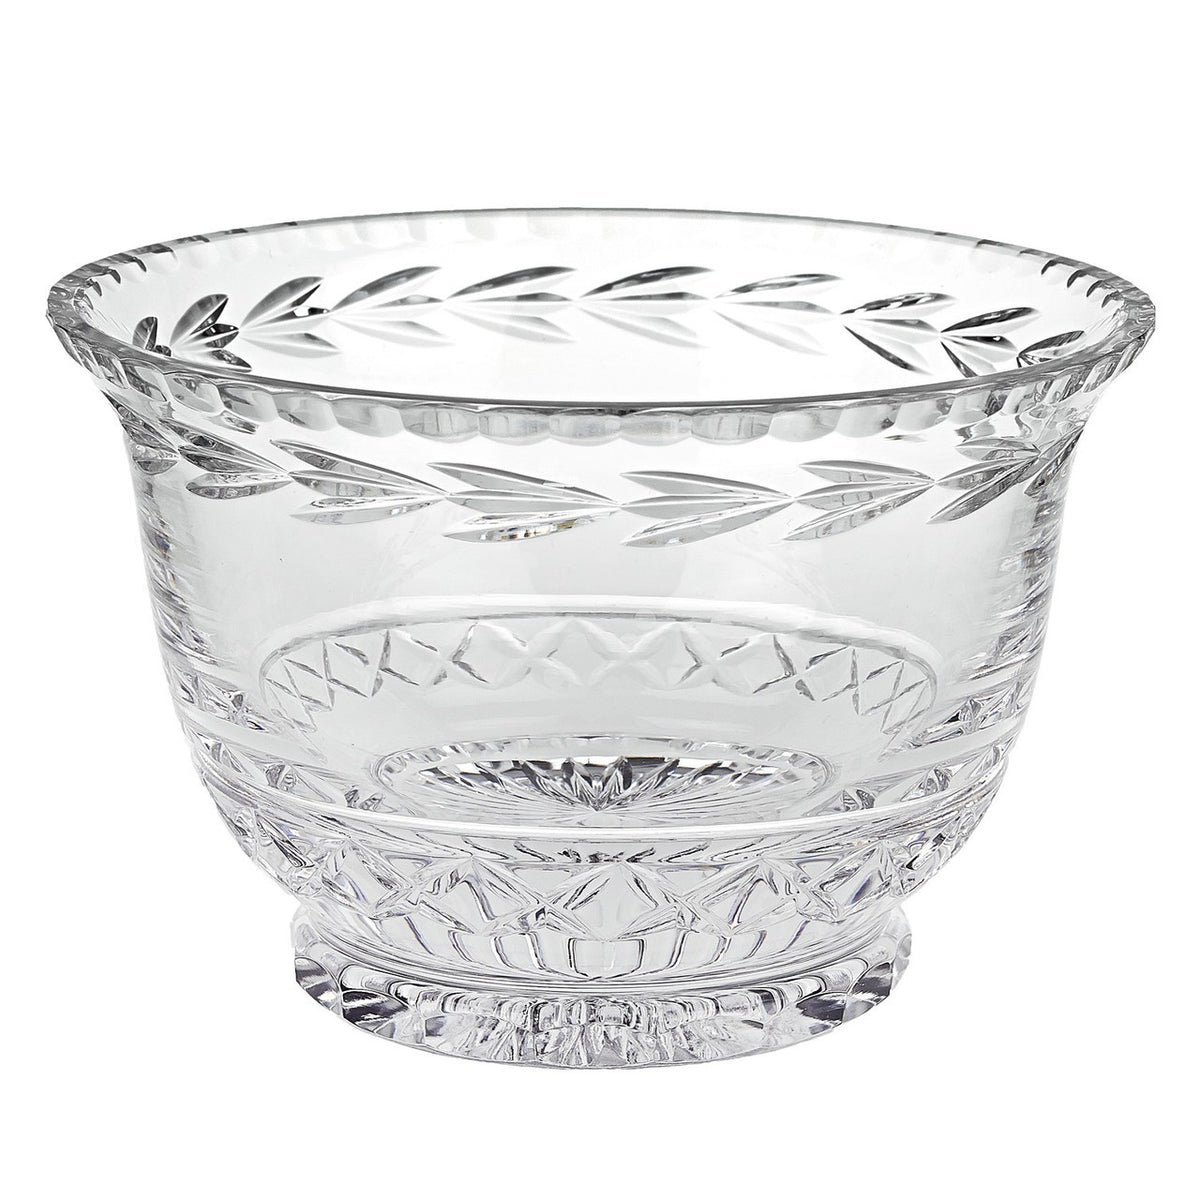 Garland Revere10 inches Bowl